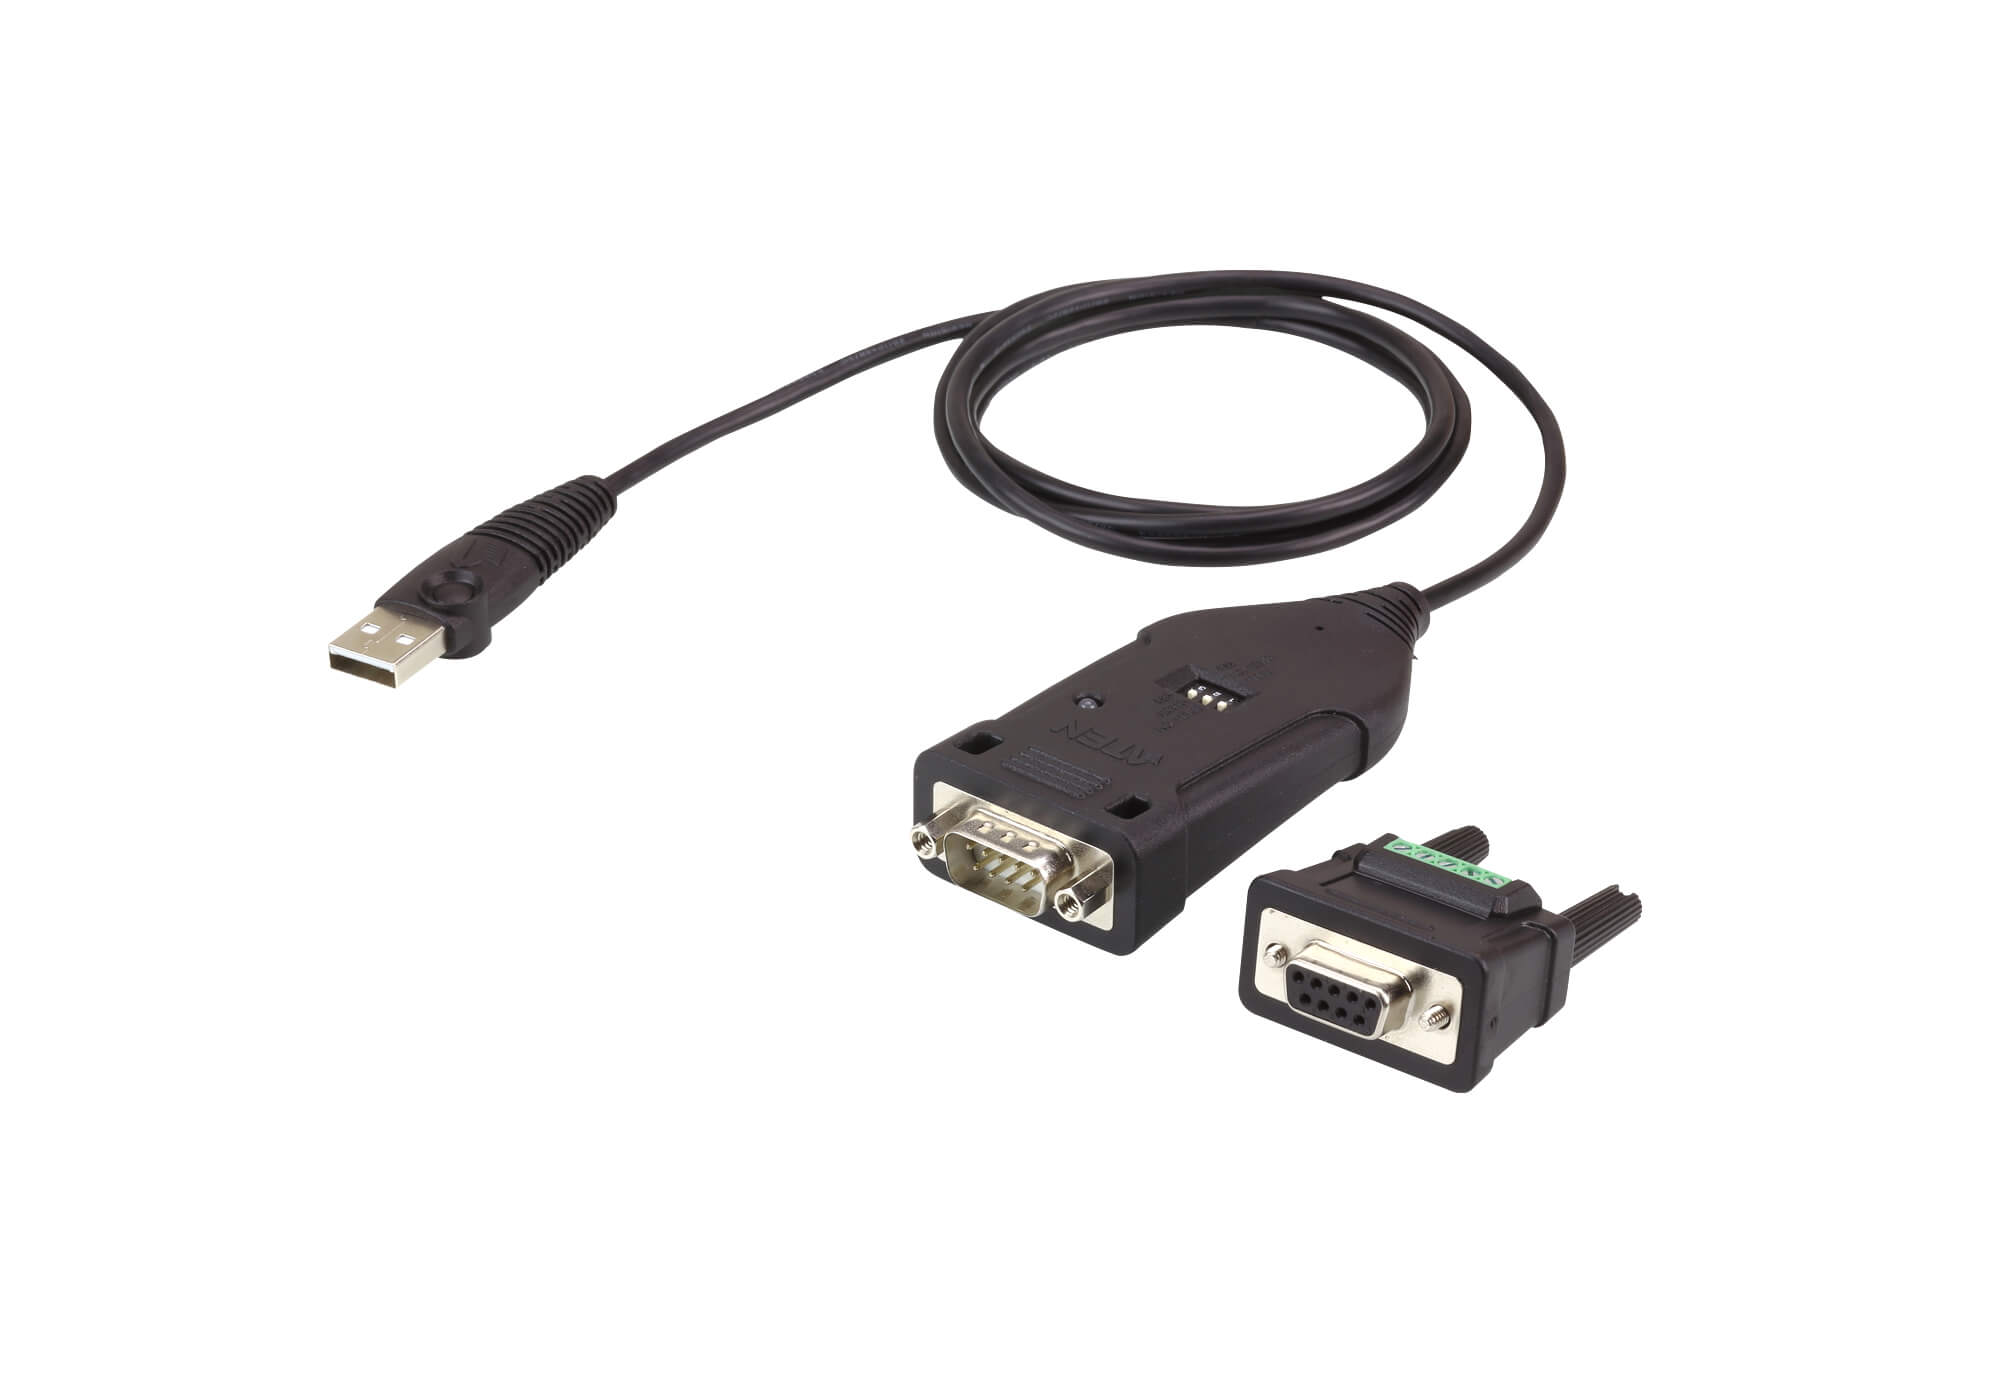 You Recently Viewed Aten UC485 USB to RS422/485 Adapter Image